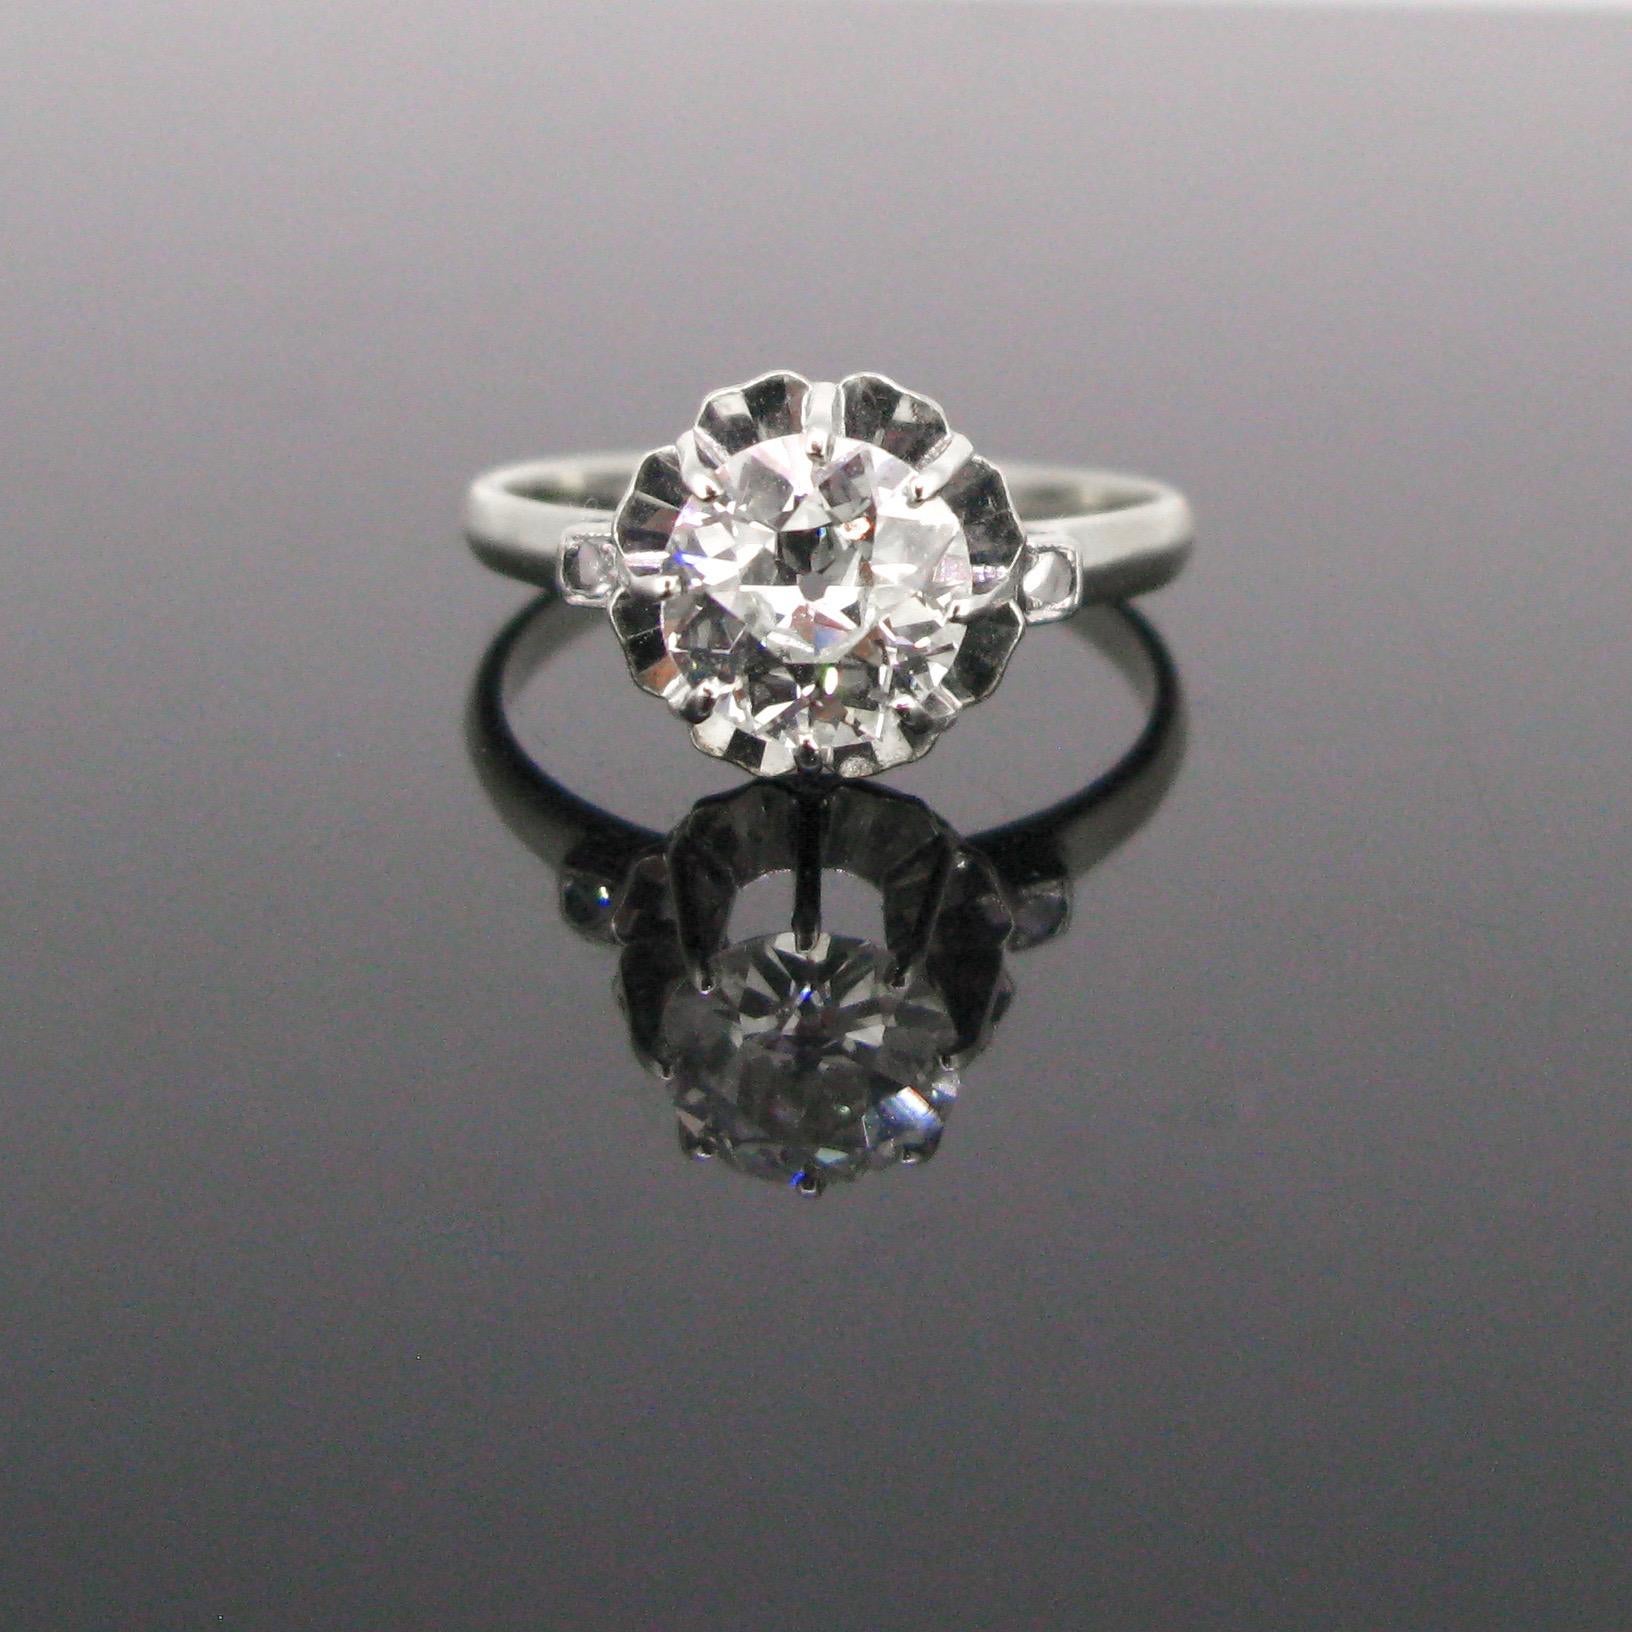 This beautiful ring is directly from the Art Deco era circa 1925. It is made in 18kt white gold and platinum (tested). It is set with an old European cut diamond weighing around 1.25ct with an illusion setting. The diamond is shouldered with two